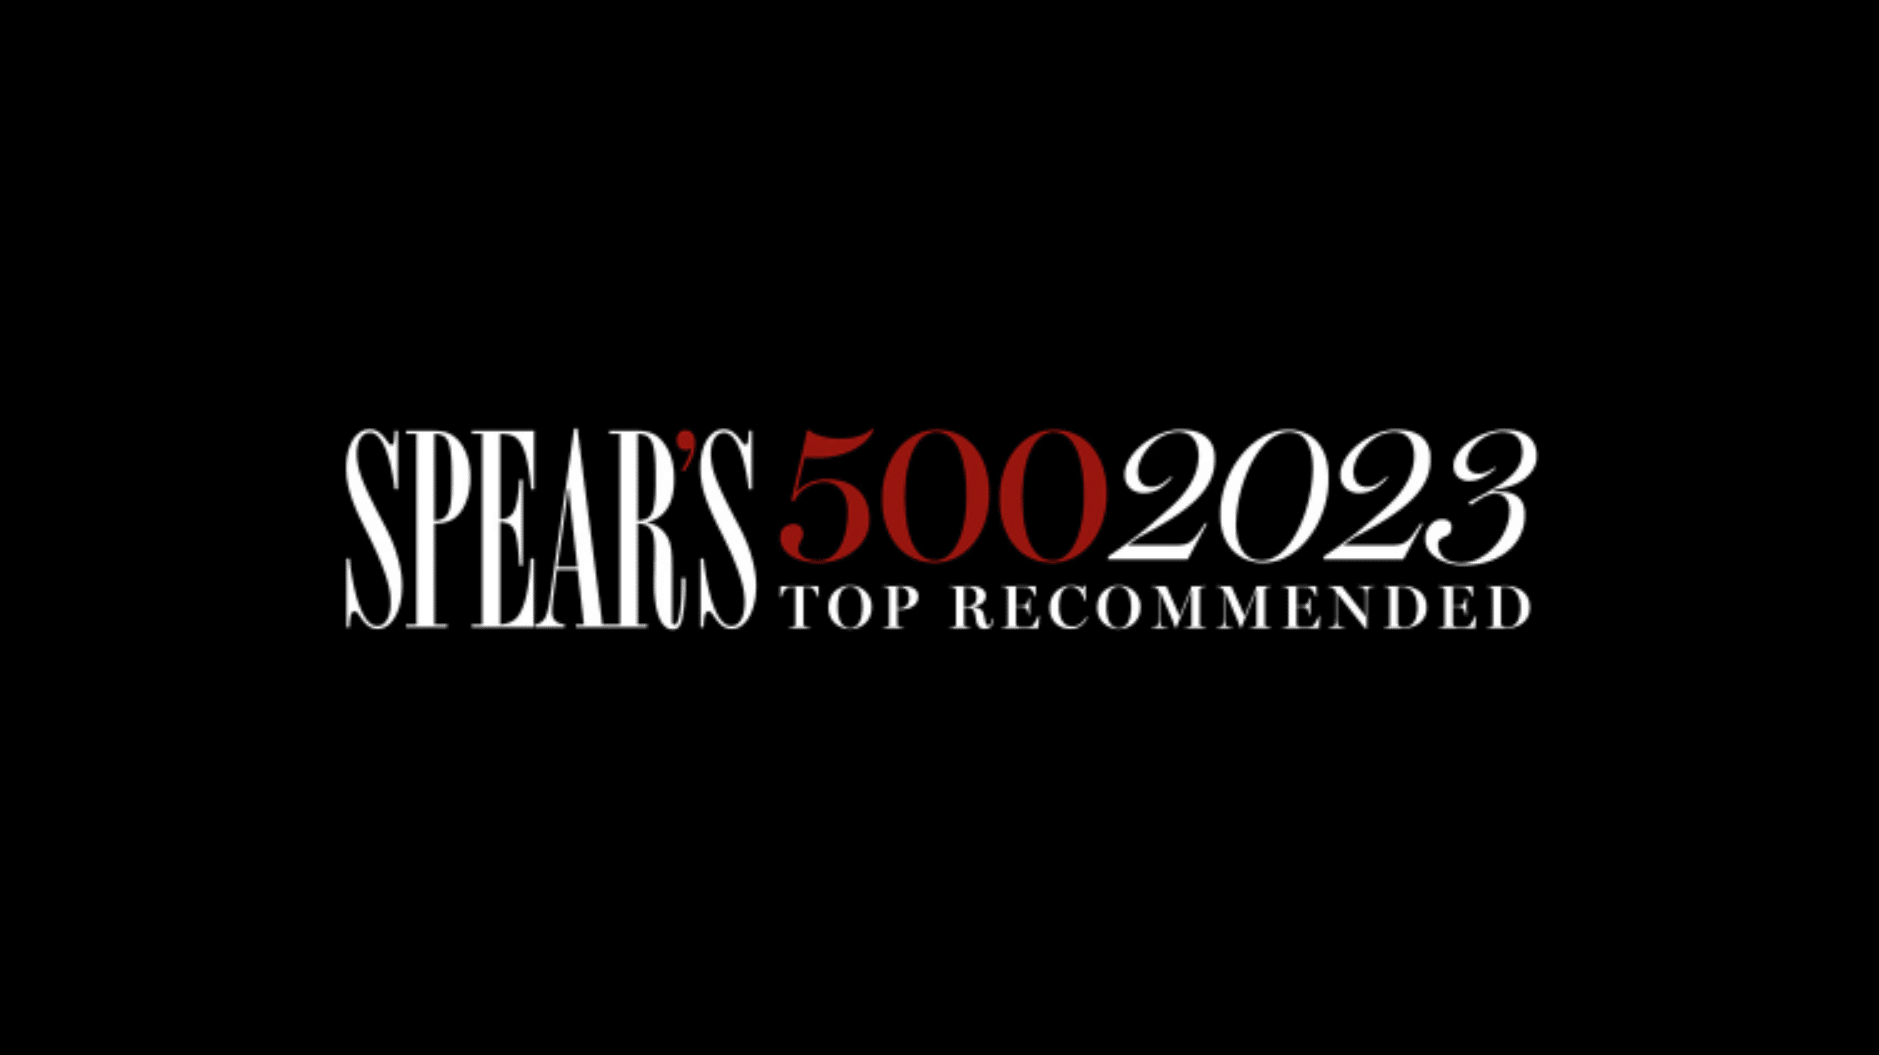 Savory and Partners is Top Recommended by Spears 500 in the Global Mobility, Residence & Citizenship by Investment Sector for 2023